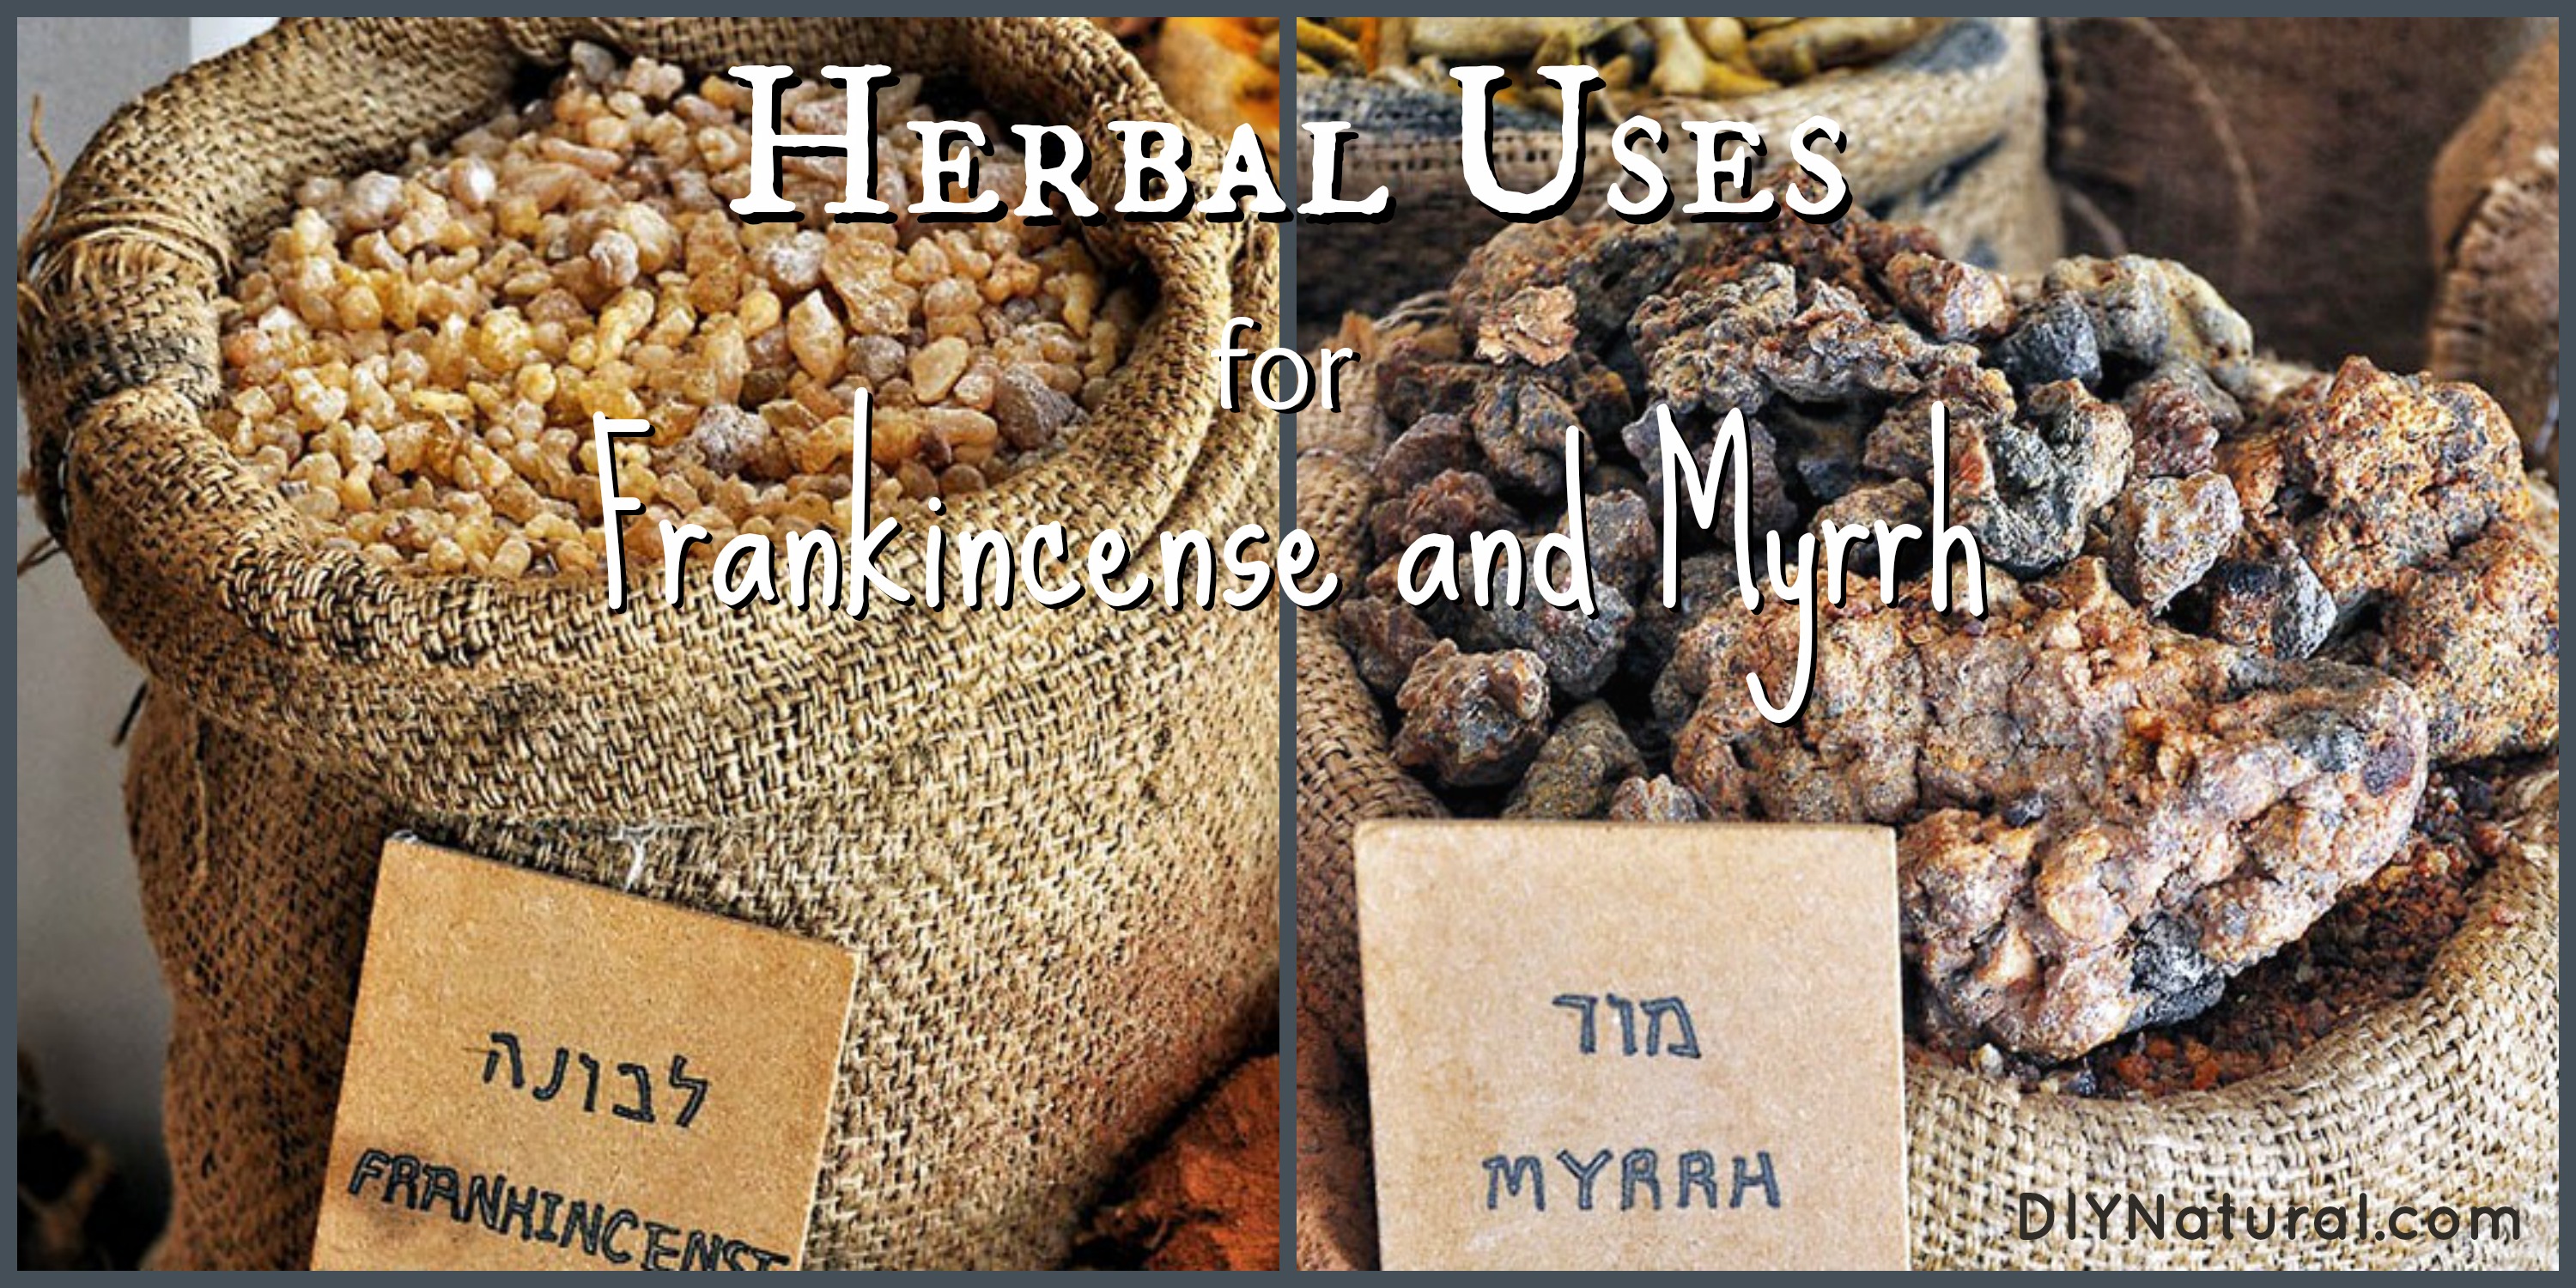 Frankincense and Myrrh: 7 Uses Including A Recipe for Soap and Hydrosol